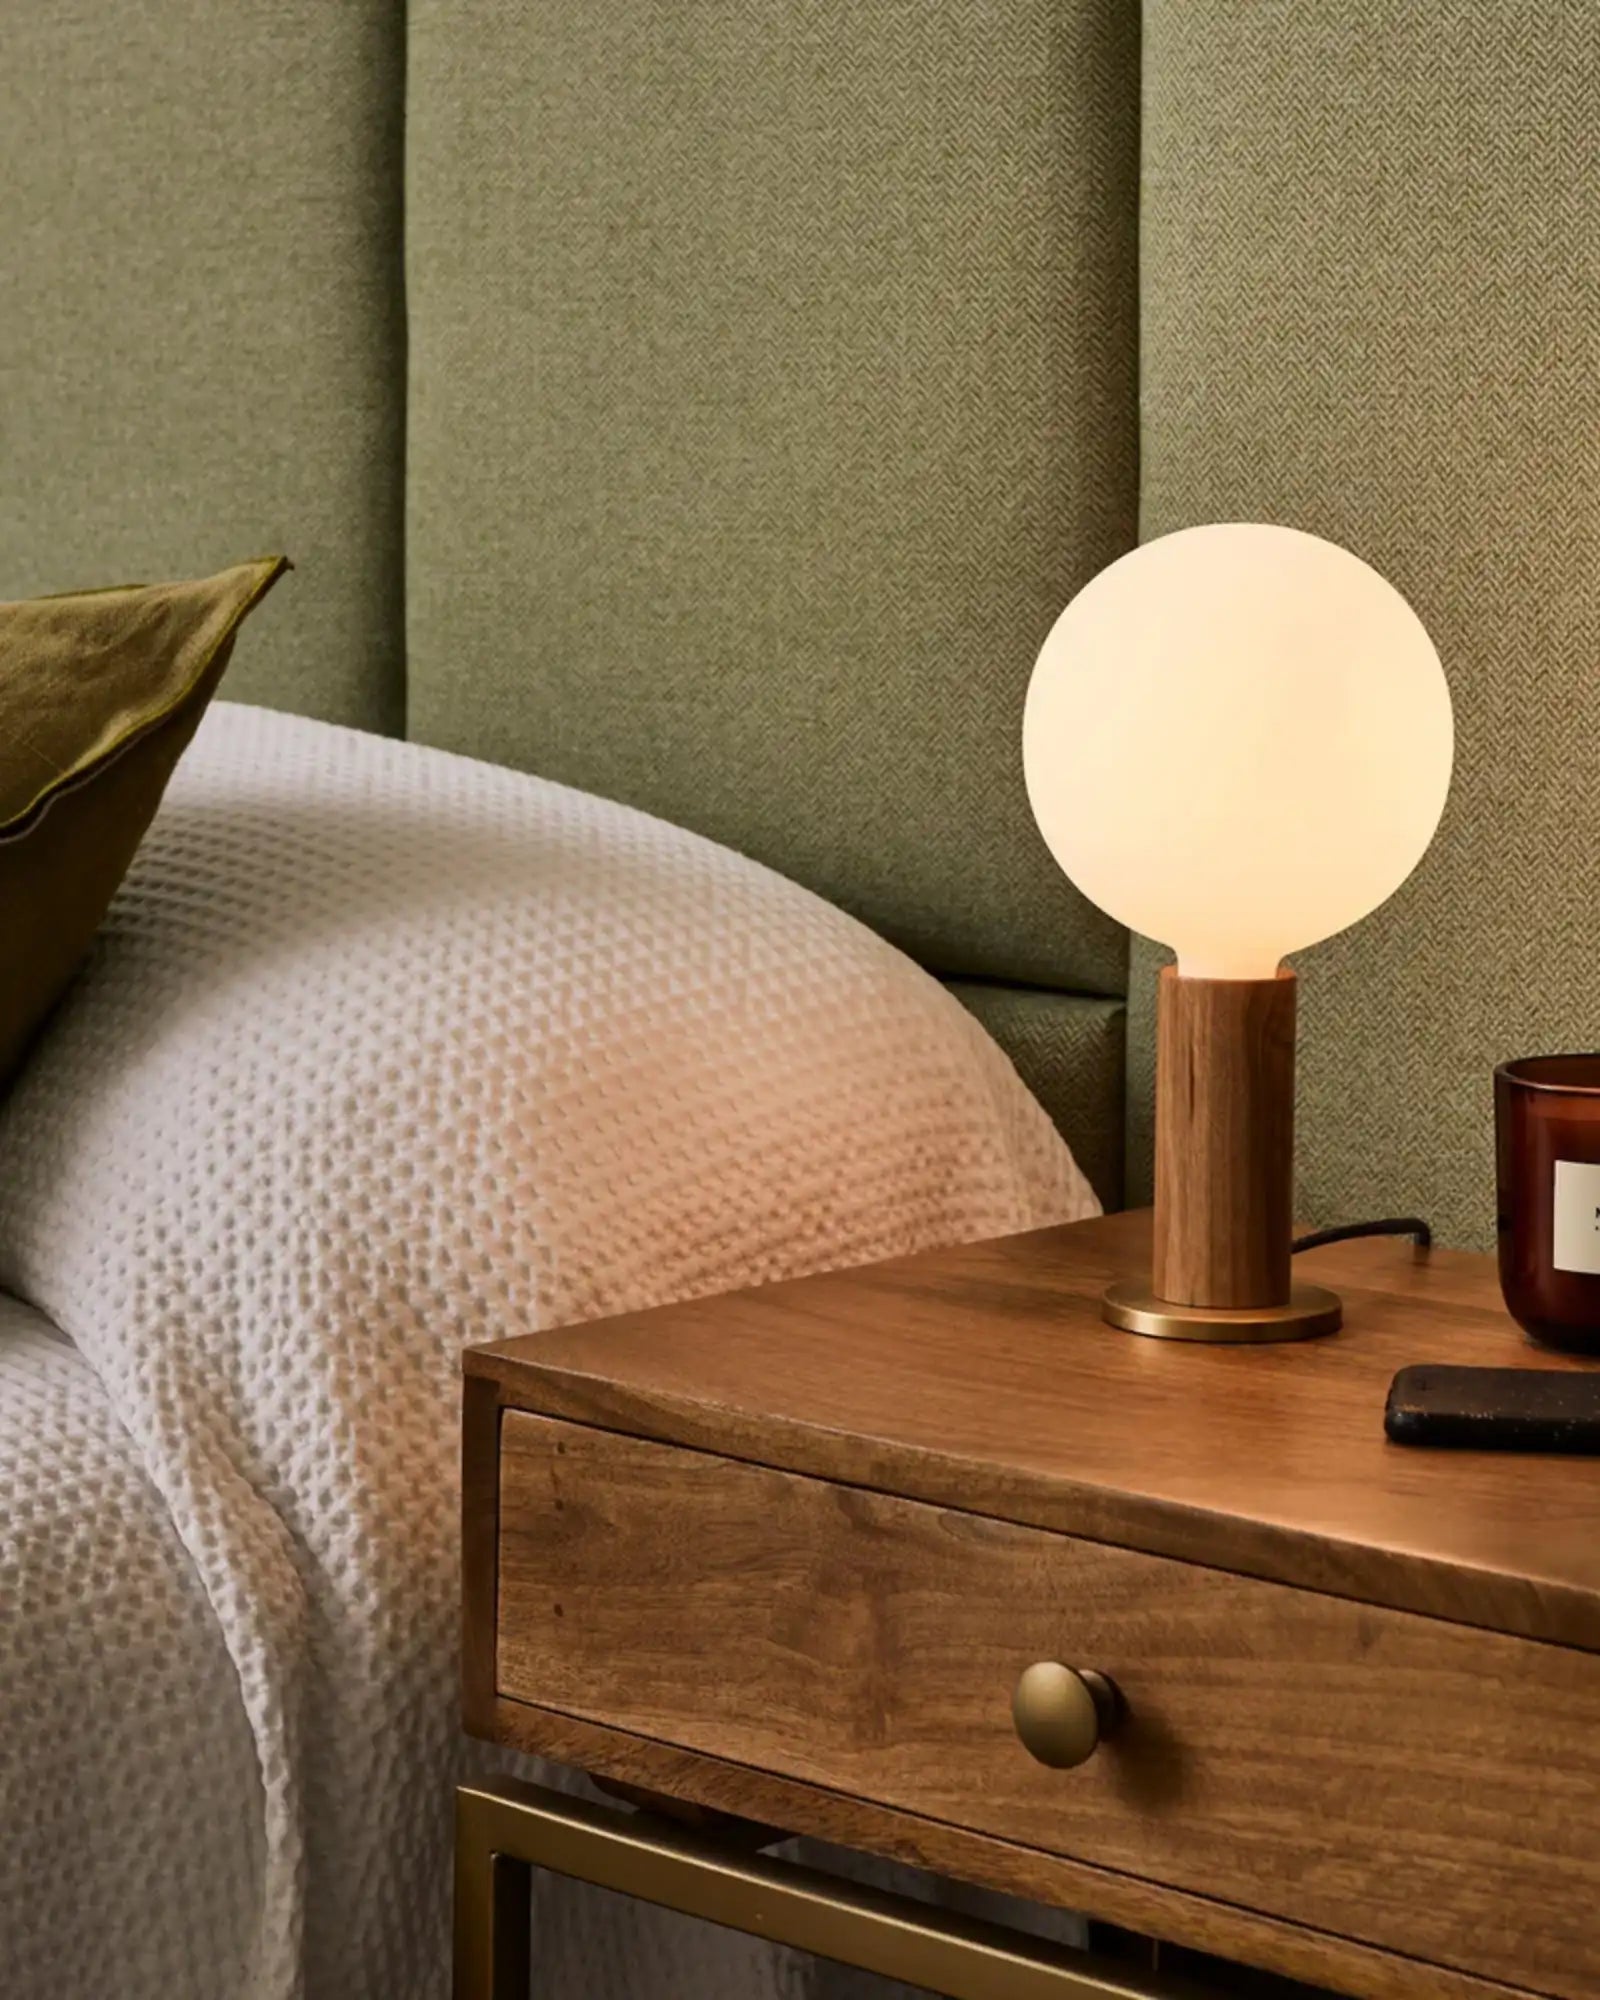 Knuckle Sphere IV Table Lamp by Tala featured within a contemporary bedroom | Nook Collections